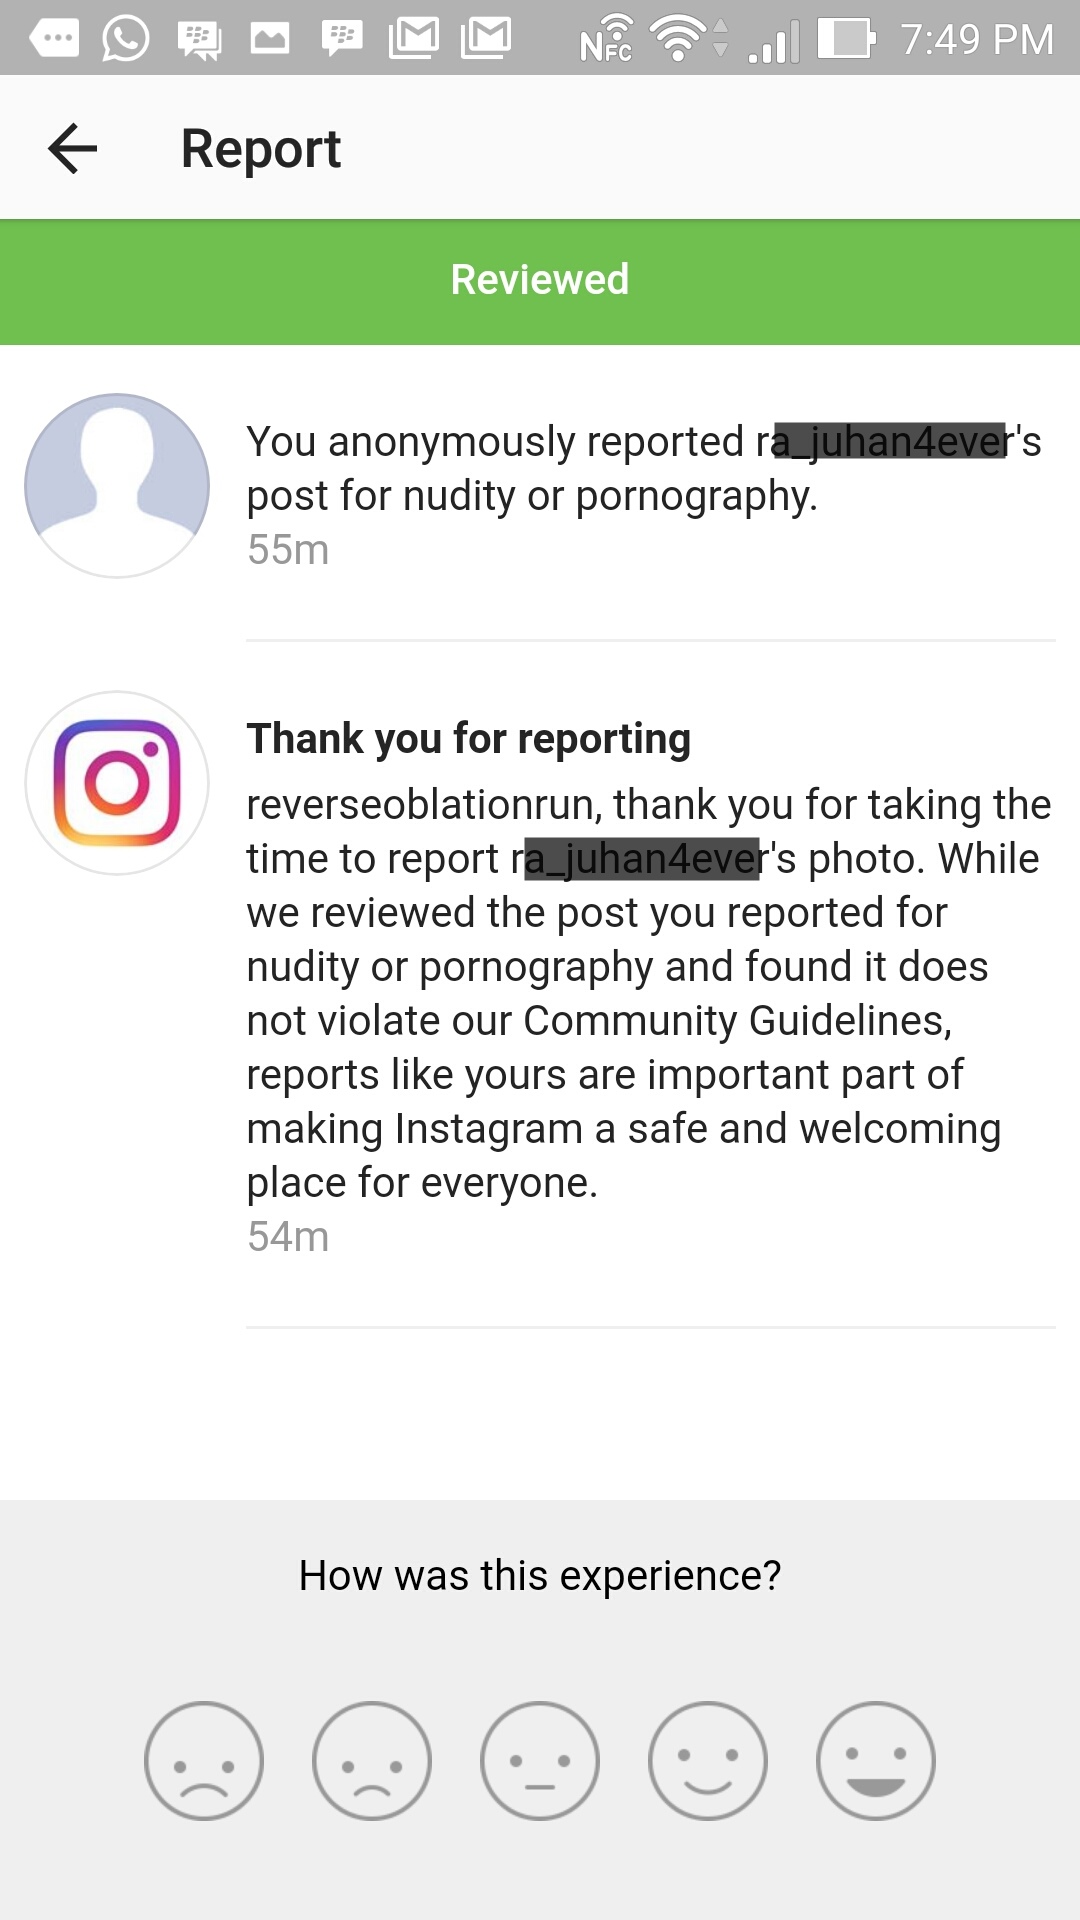 REPORT RA IGNORED BY IG